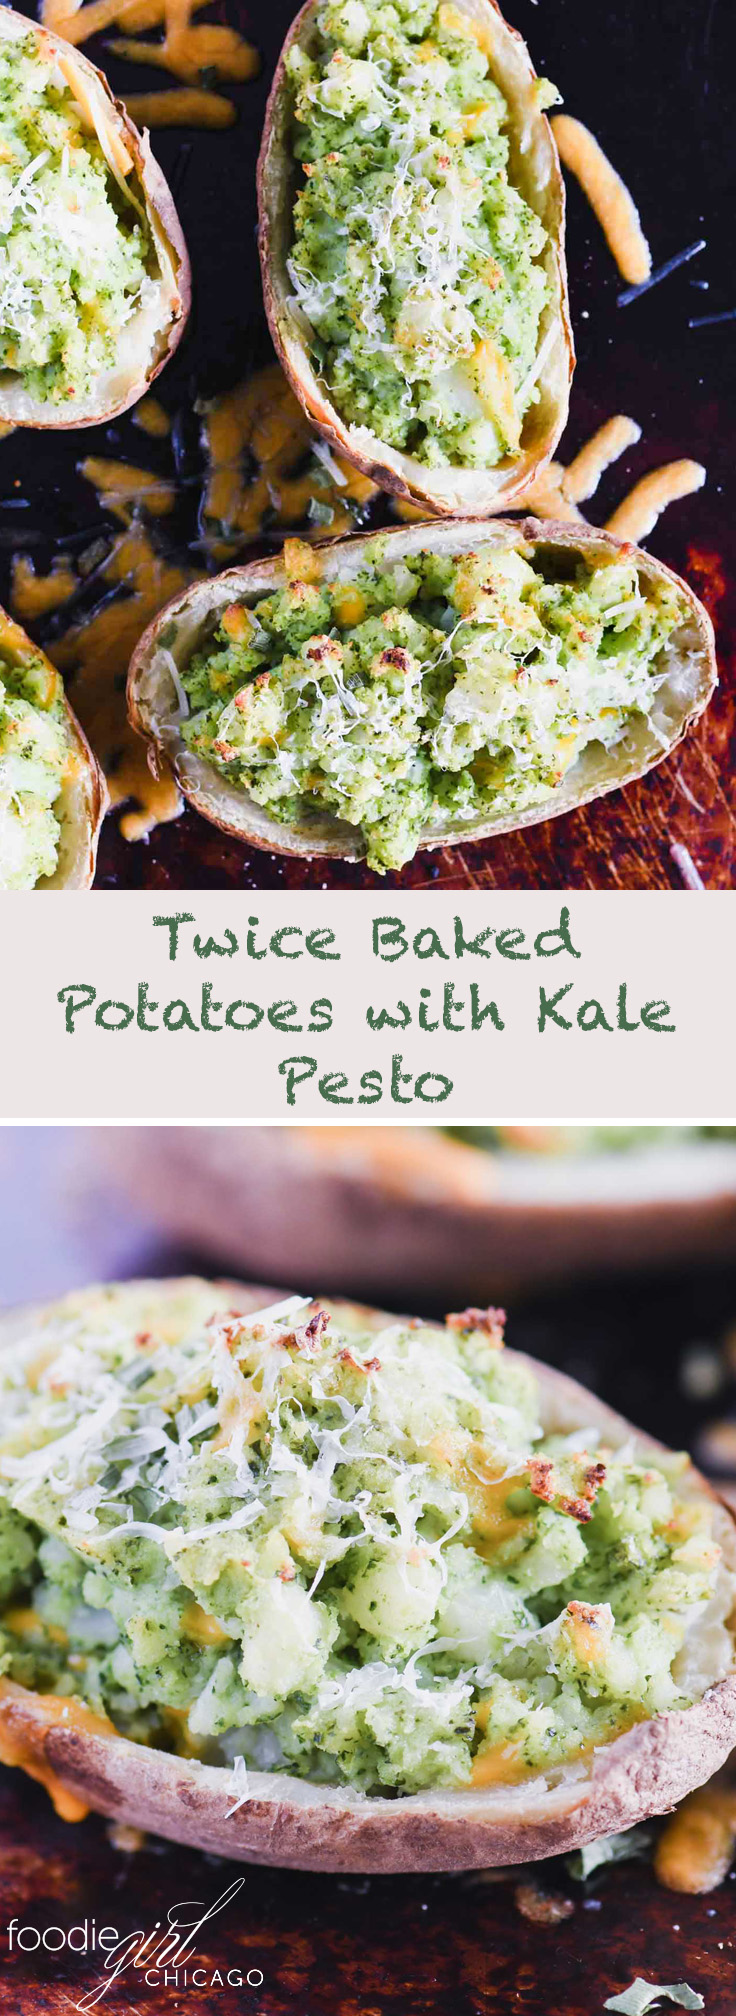 These creamy twice baked potatoes get an added healthy punch from kale pesto, making them the ultimate comfort food!